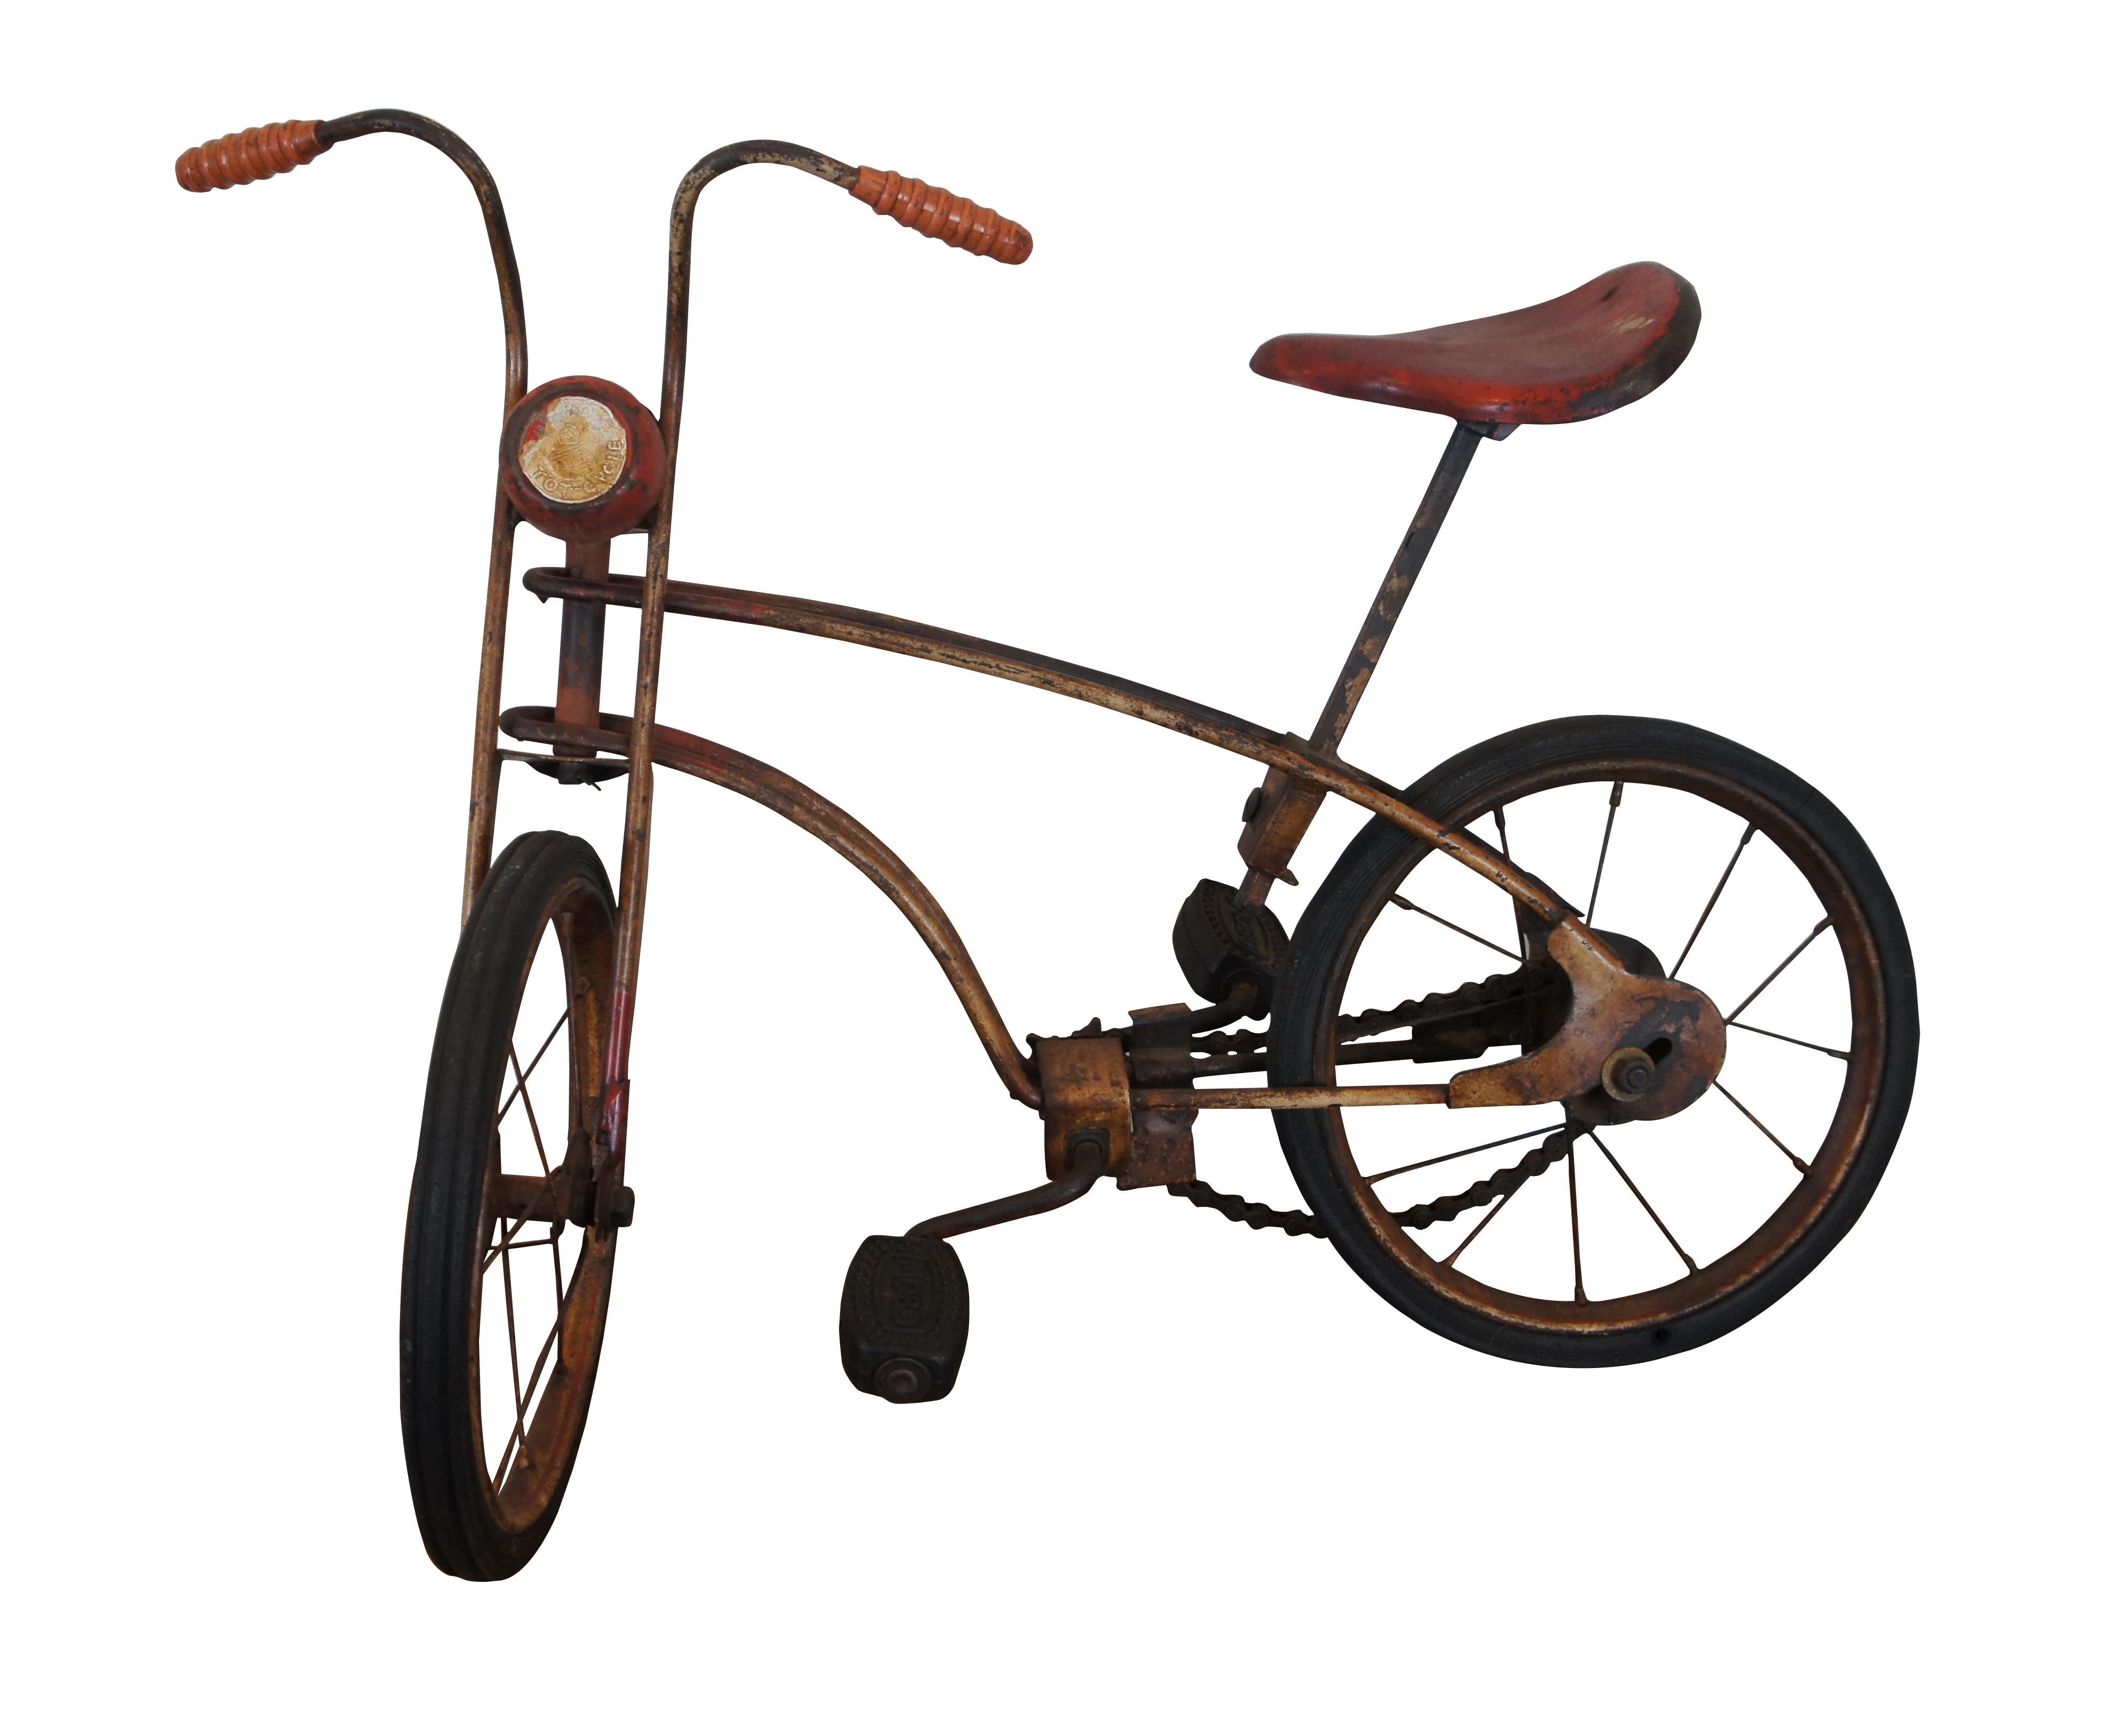 Antique child’s bicycle, the Mobo Tot-Cycle by Sebel Products of England.  Features a well worn steel frame with red and white paint job, rubber tires and foot pedals, textured hand grips and metal saddle seat.  Circa 1926.